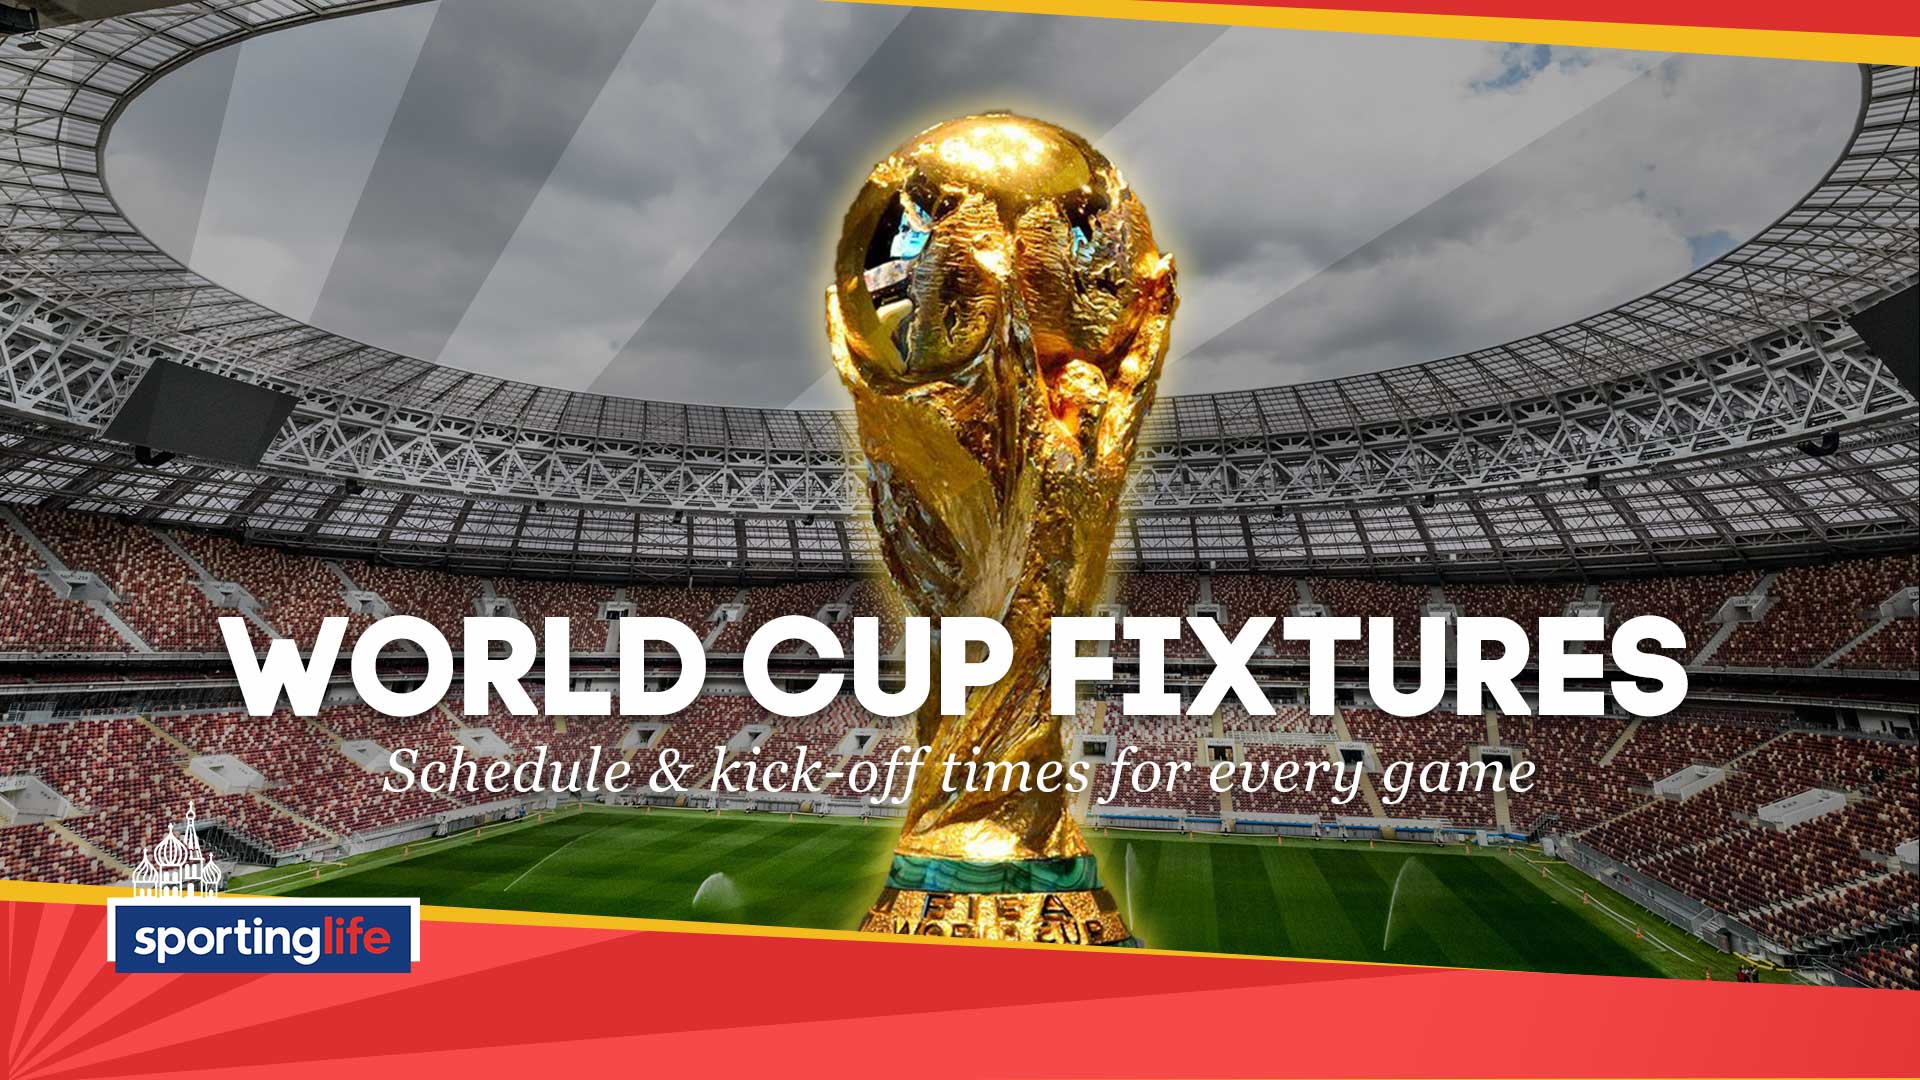 World Cup fixtures: The full schedule for Russia 2018, Football News